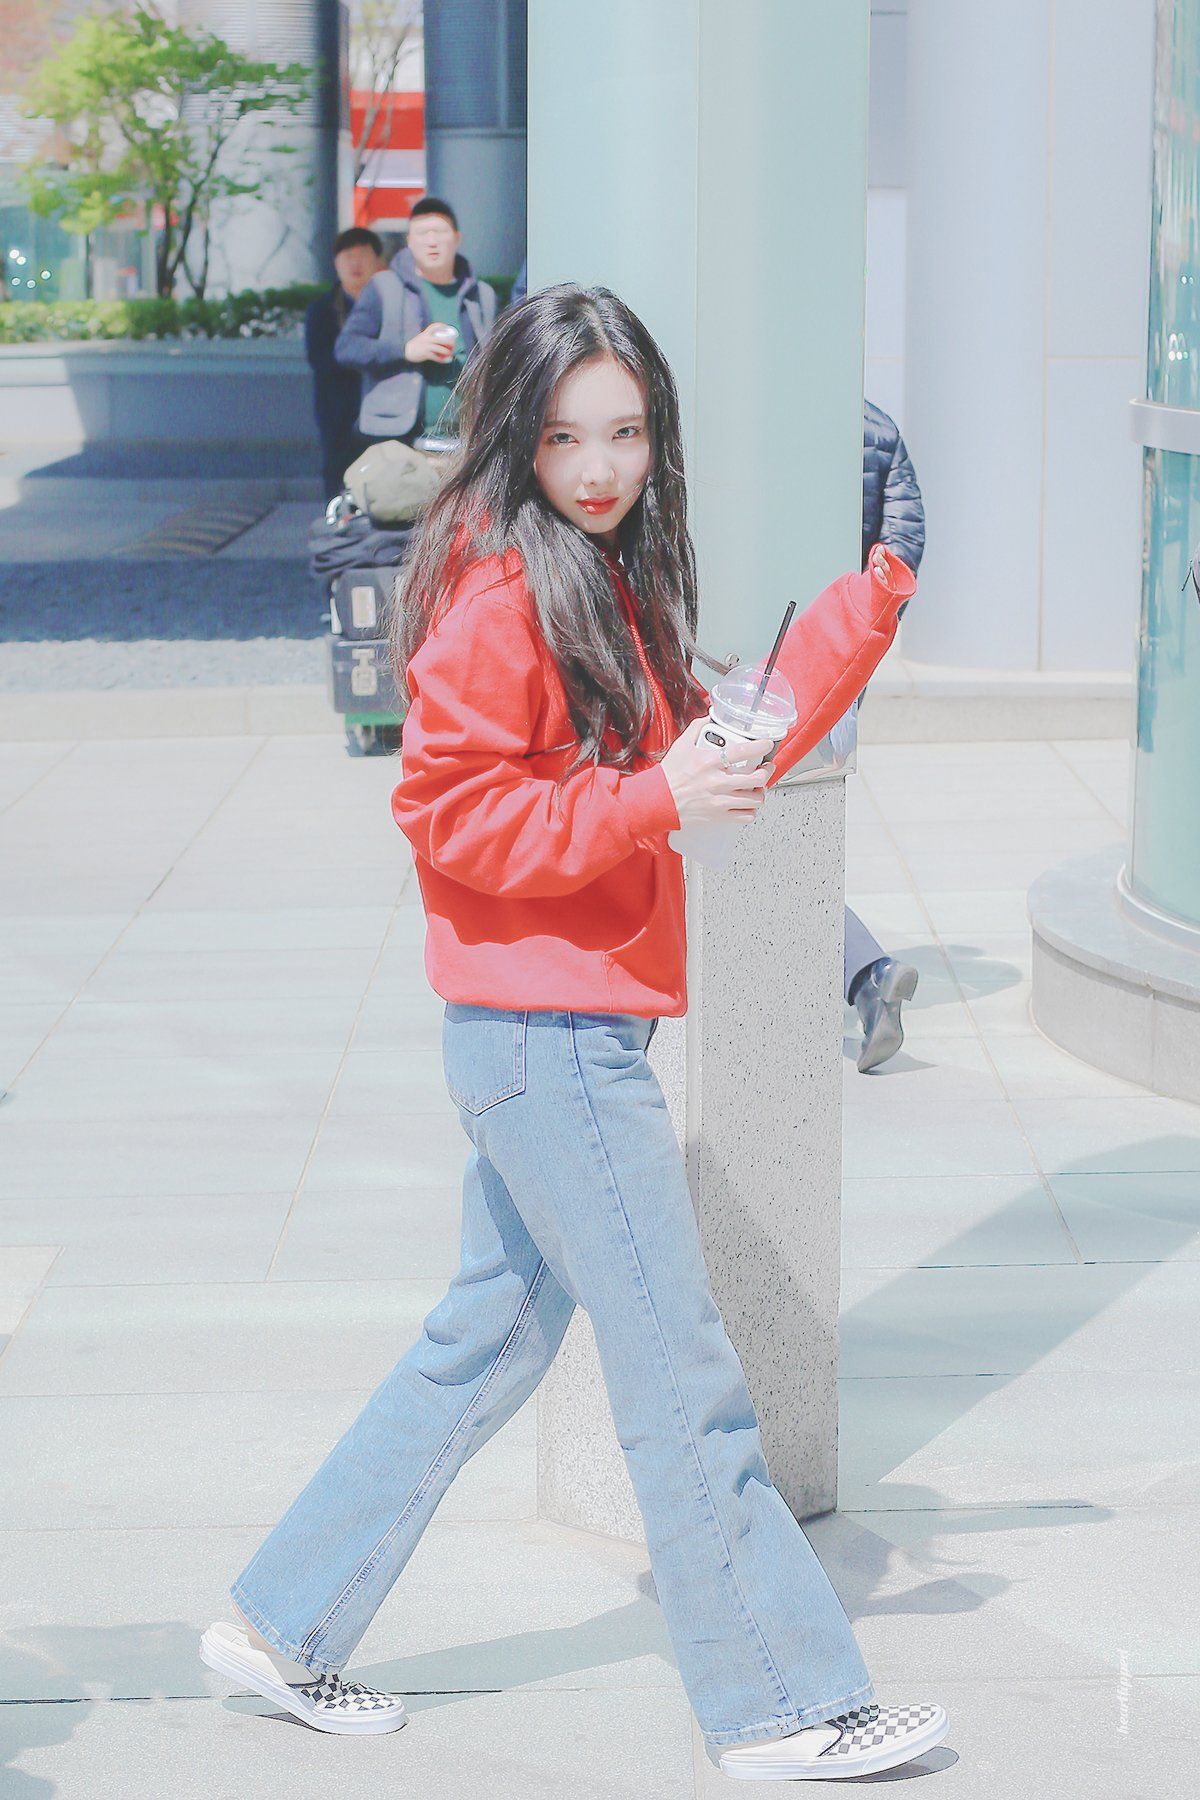 Twice Nayeon S Casual Airport Fashion Will Make You Want To Raid Her Closet K Luv